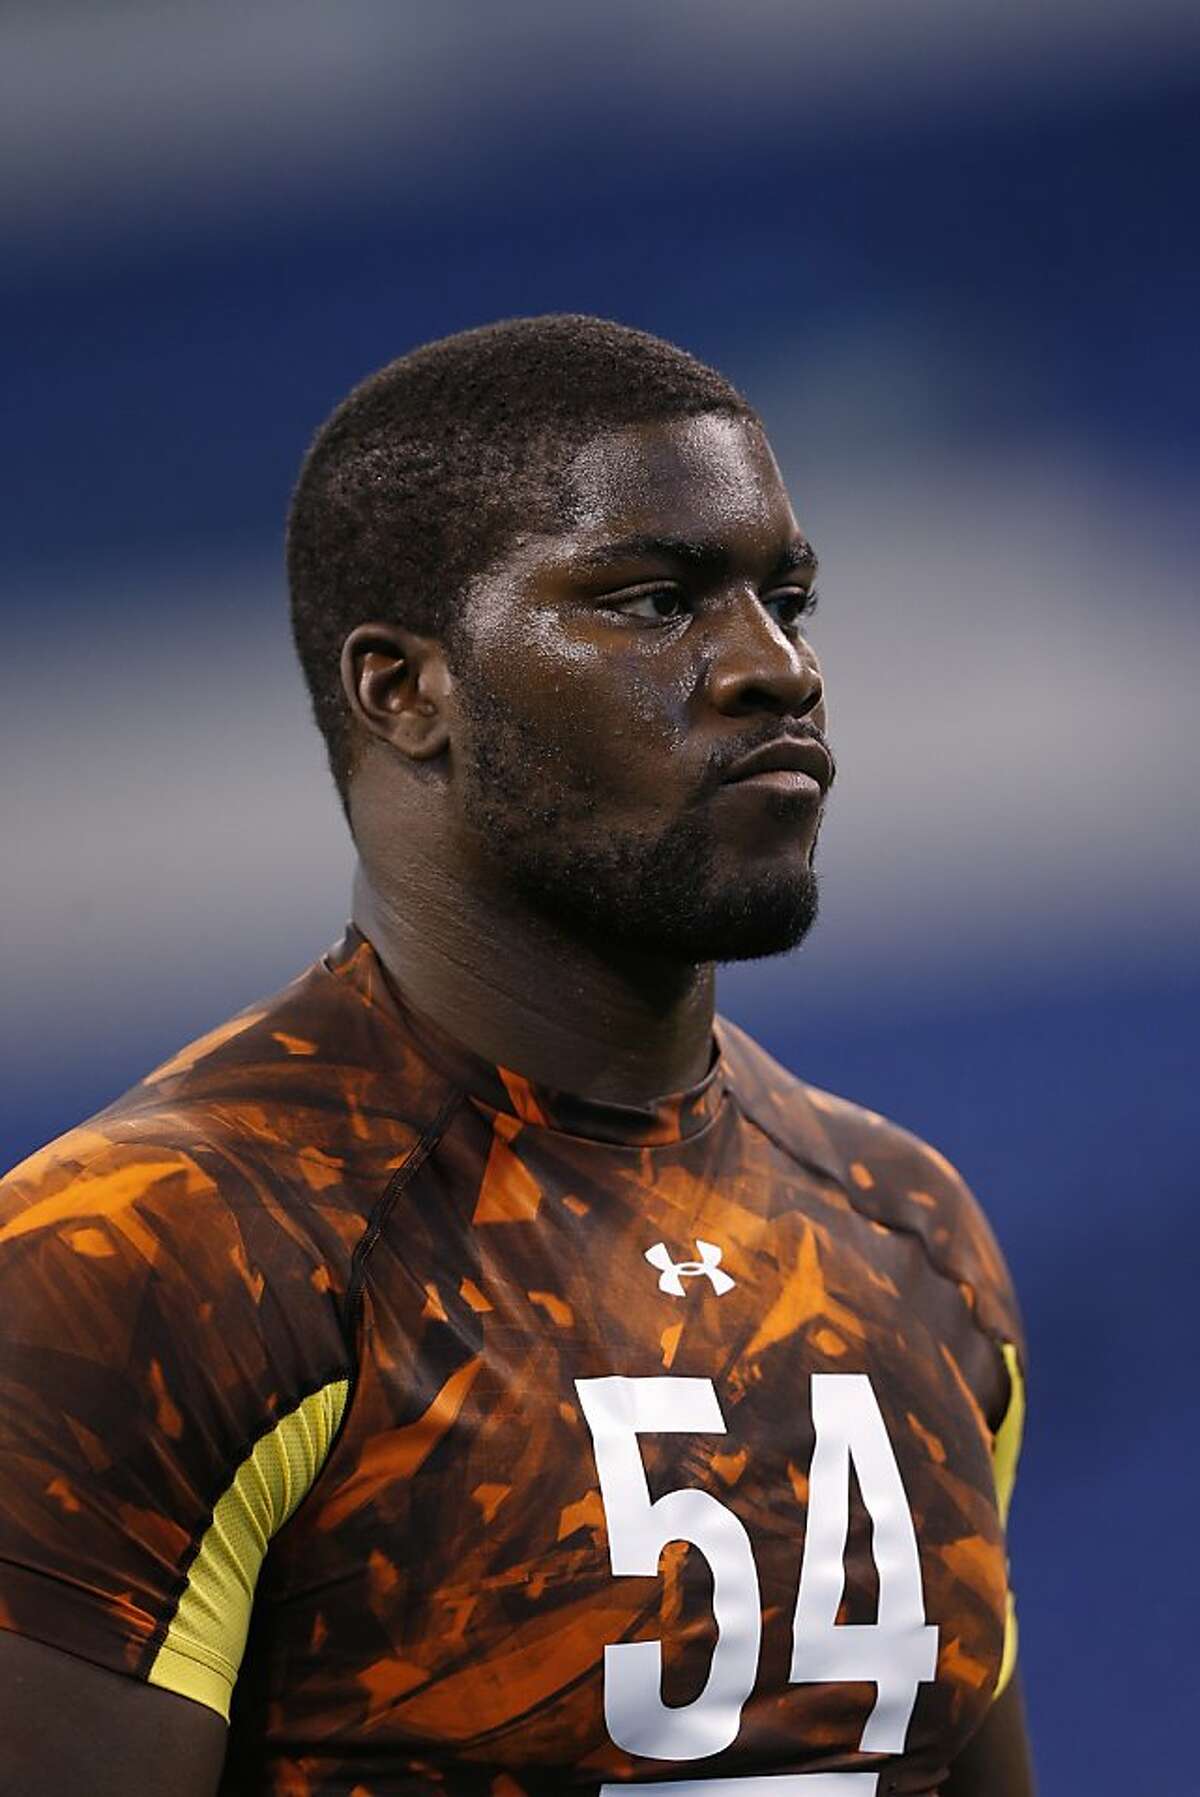 INDIANAPOLIS, IN - FEBRUARY 23: Menelik Watson of Florida State looks on during the 2013 NFL Combine at Lucas Oil Stadium on February 23, 2013 in Indianapolis, Indiana. (Photo by Joe Robbins/Getty Images)